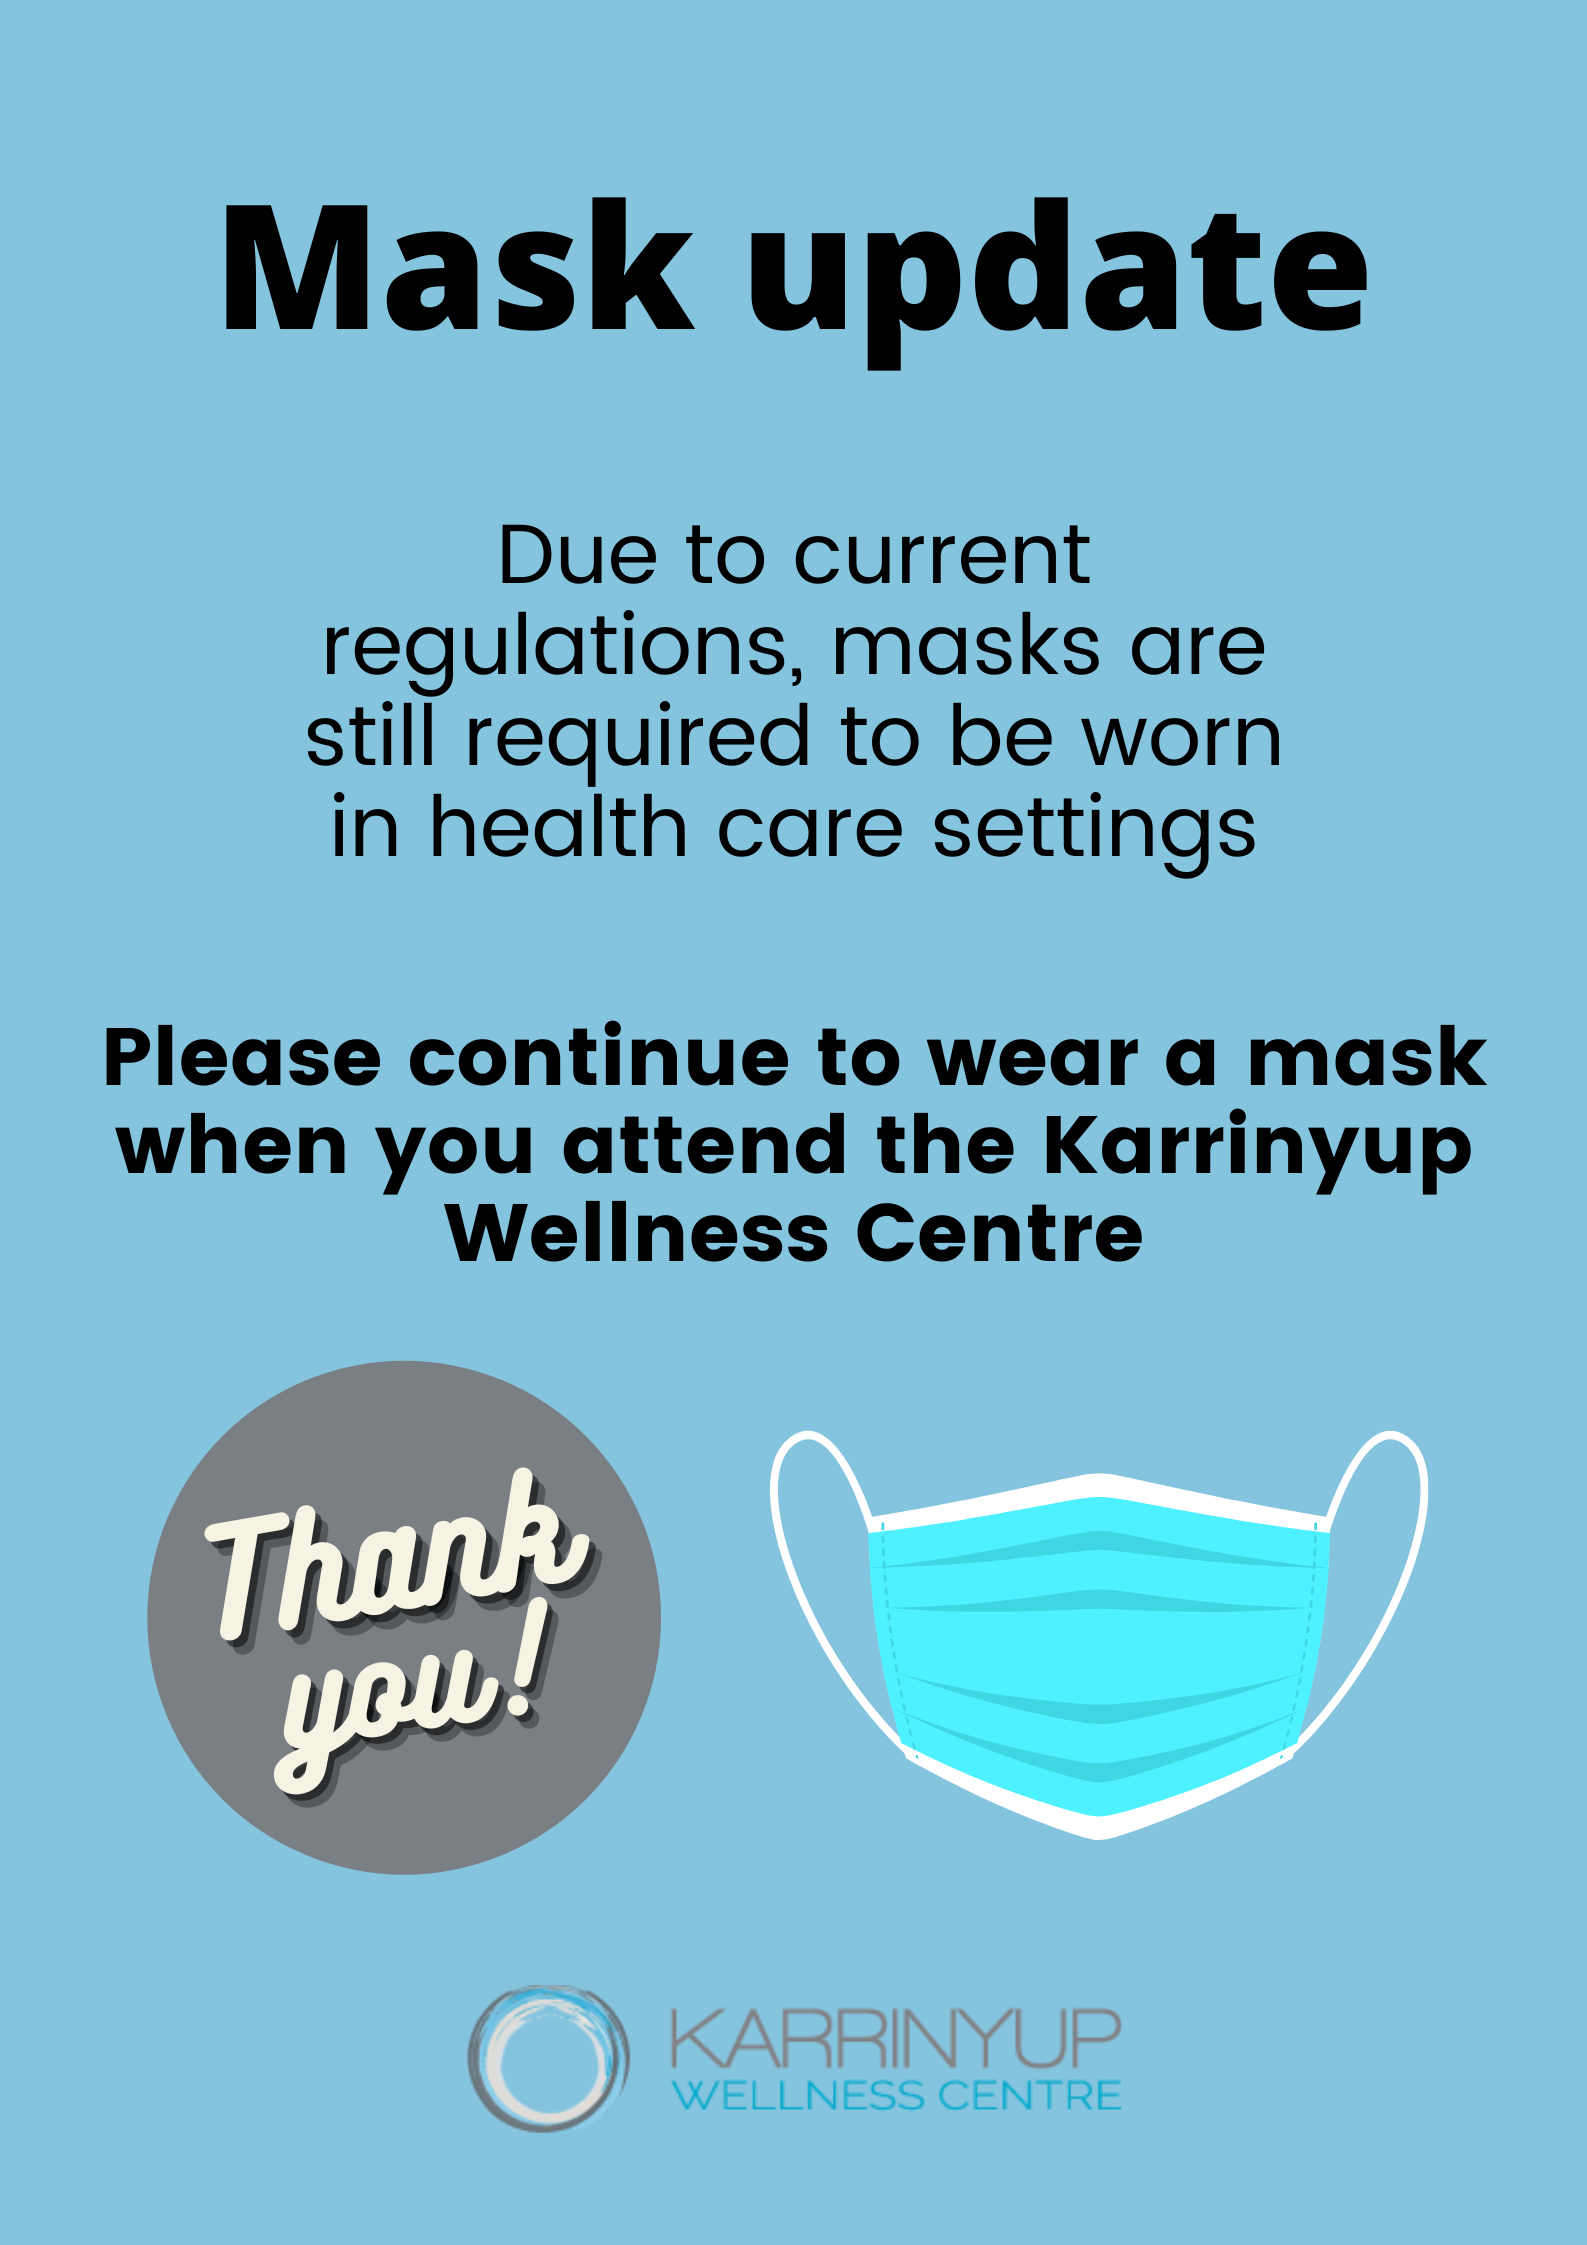 MASK REGULATIONS IN HEALTH CARE